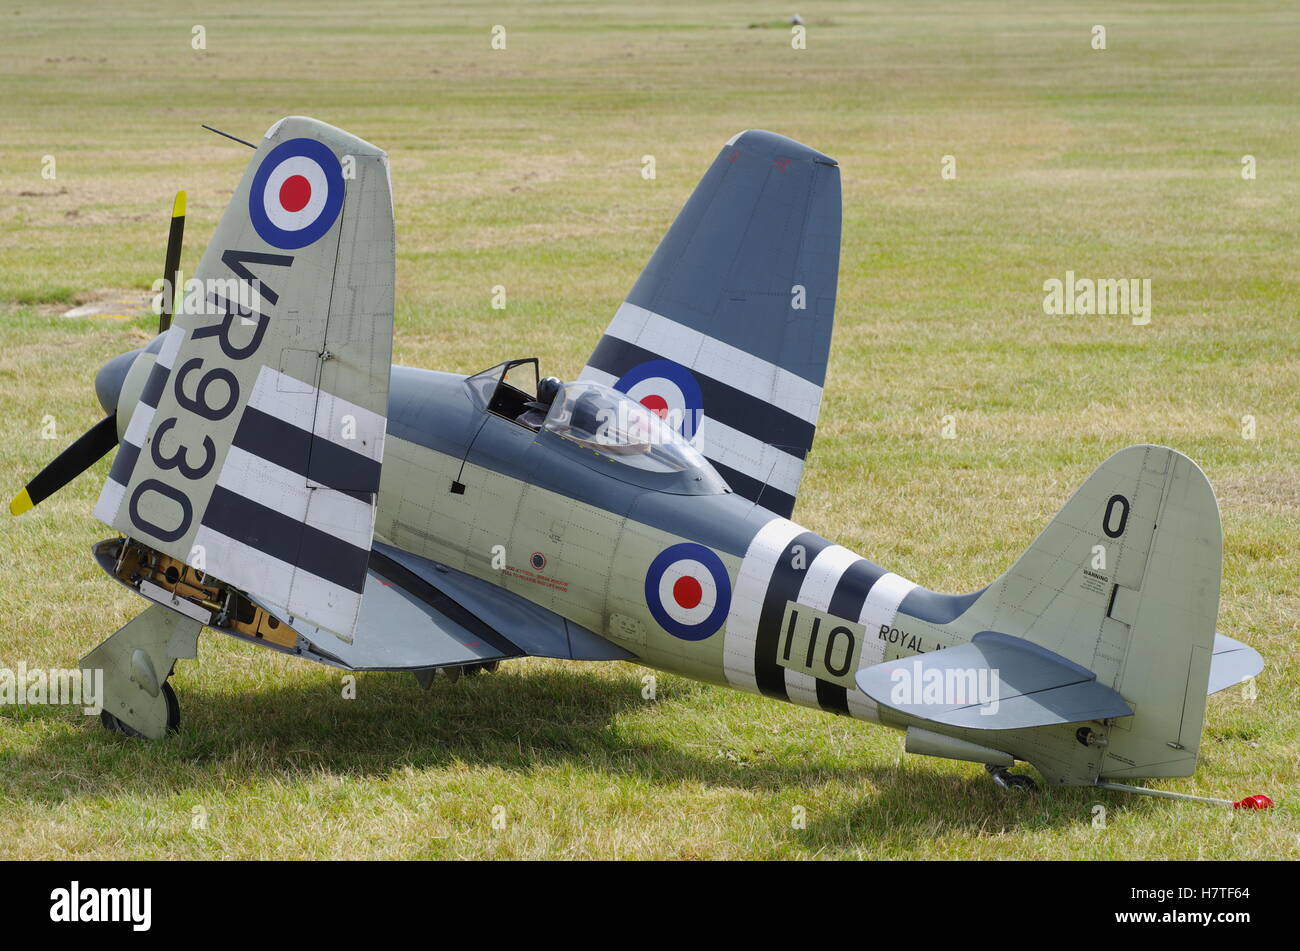 Hawker Sea Fury, Large scale model aircraft at RAF Cosford Airfield Stock Photo